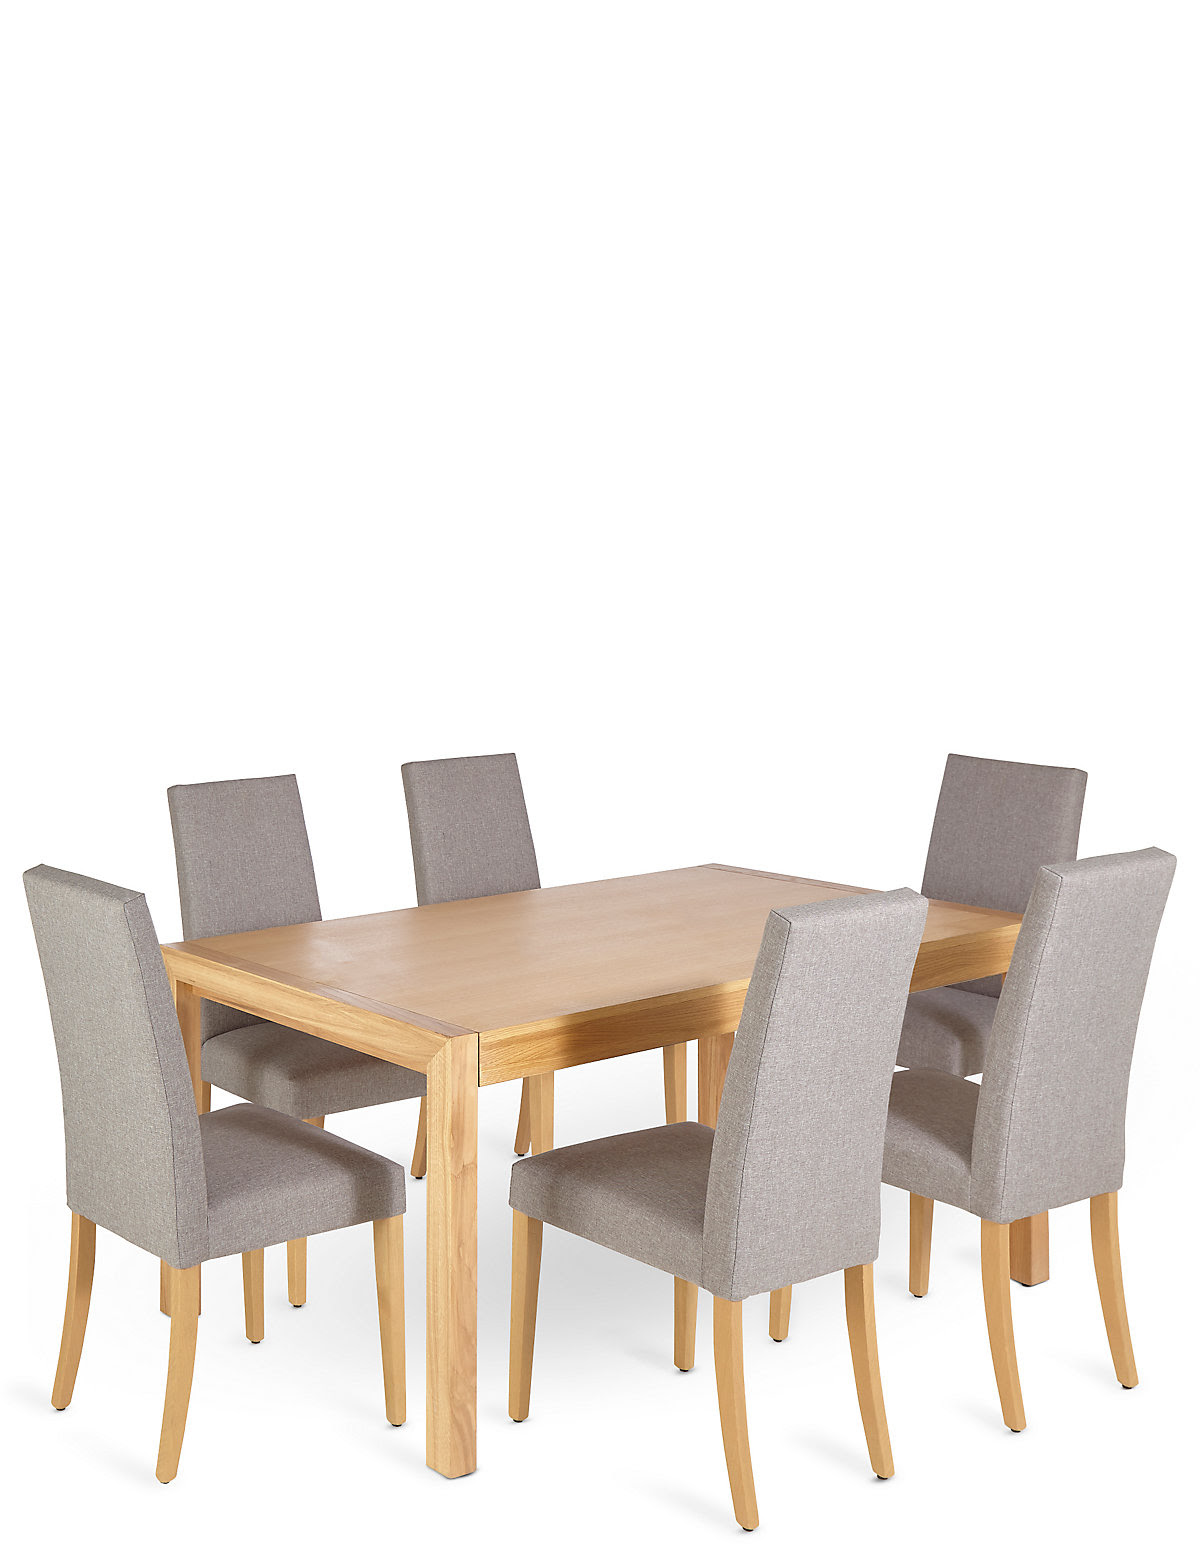 Dining Room Chairs Design Builders